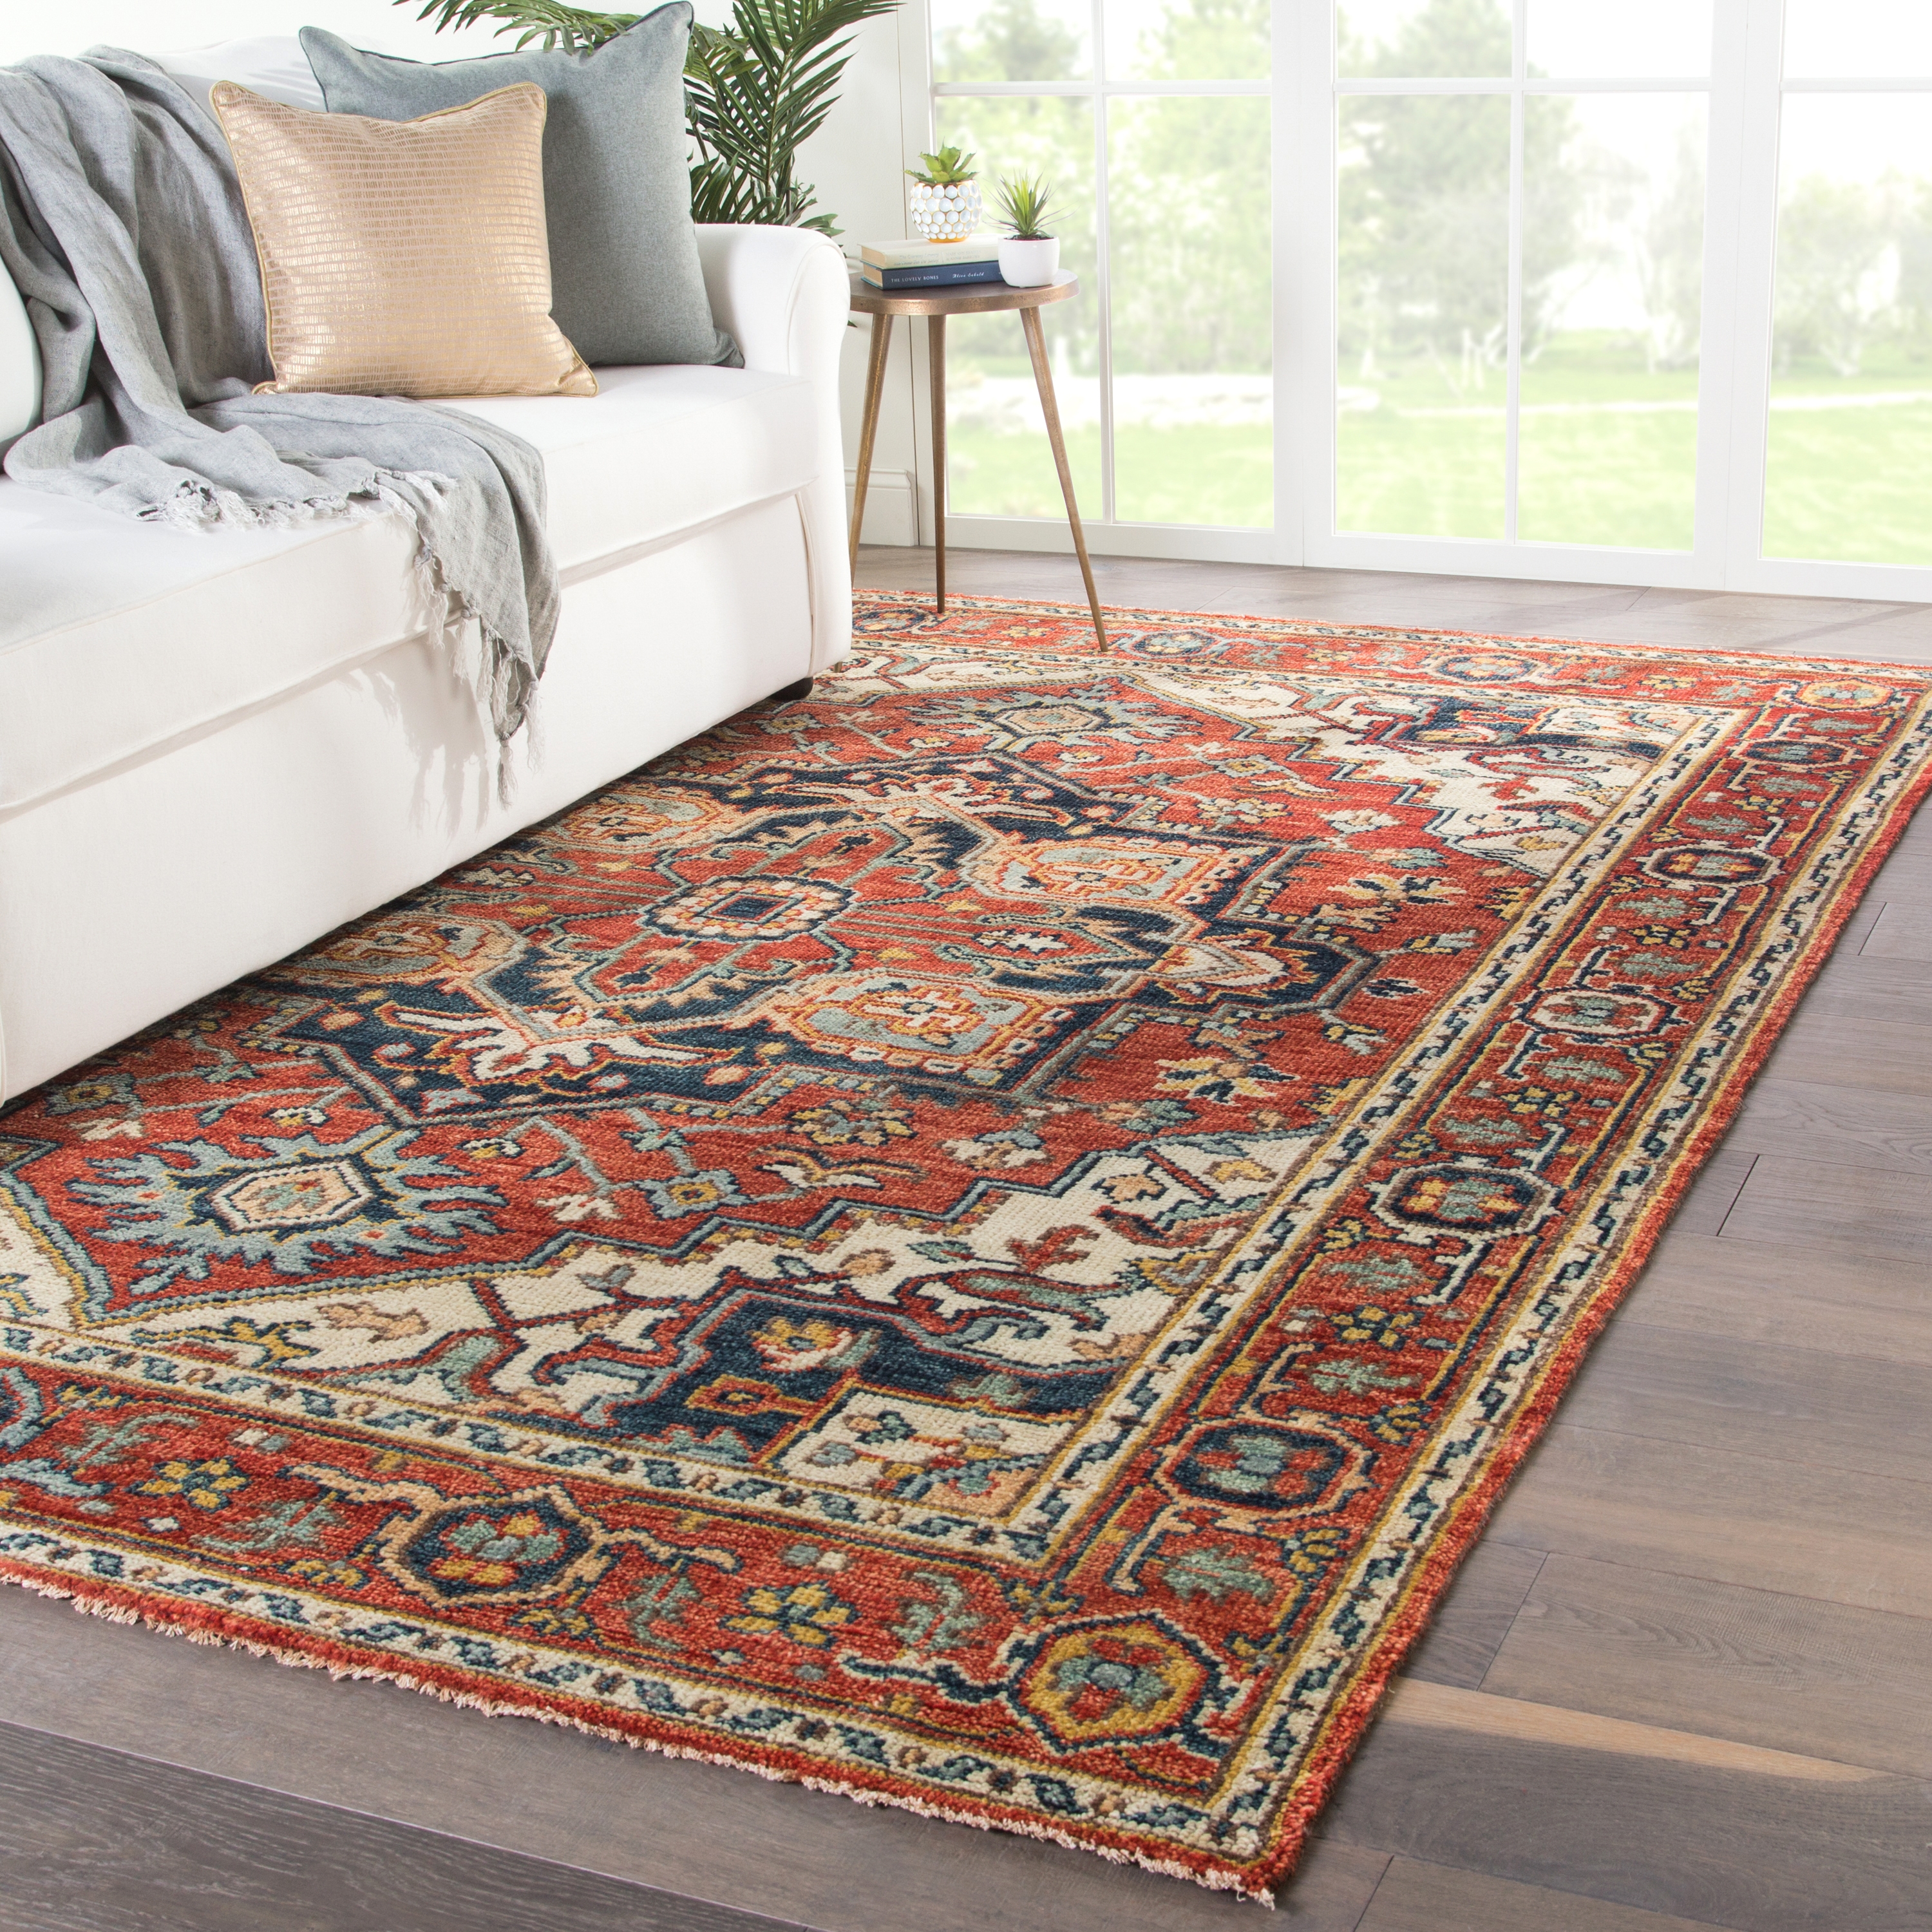 Willa Hand-Knotted Medallion Red/ Multicolor Area Rug (8'6"X11'6") - Image 4